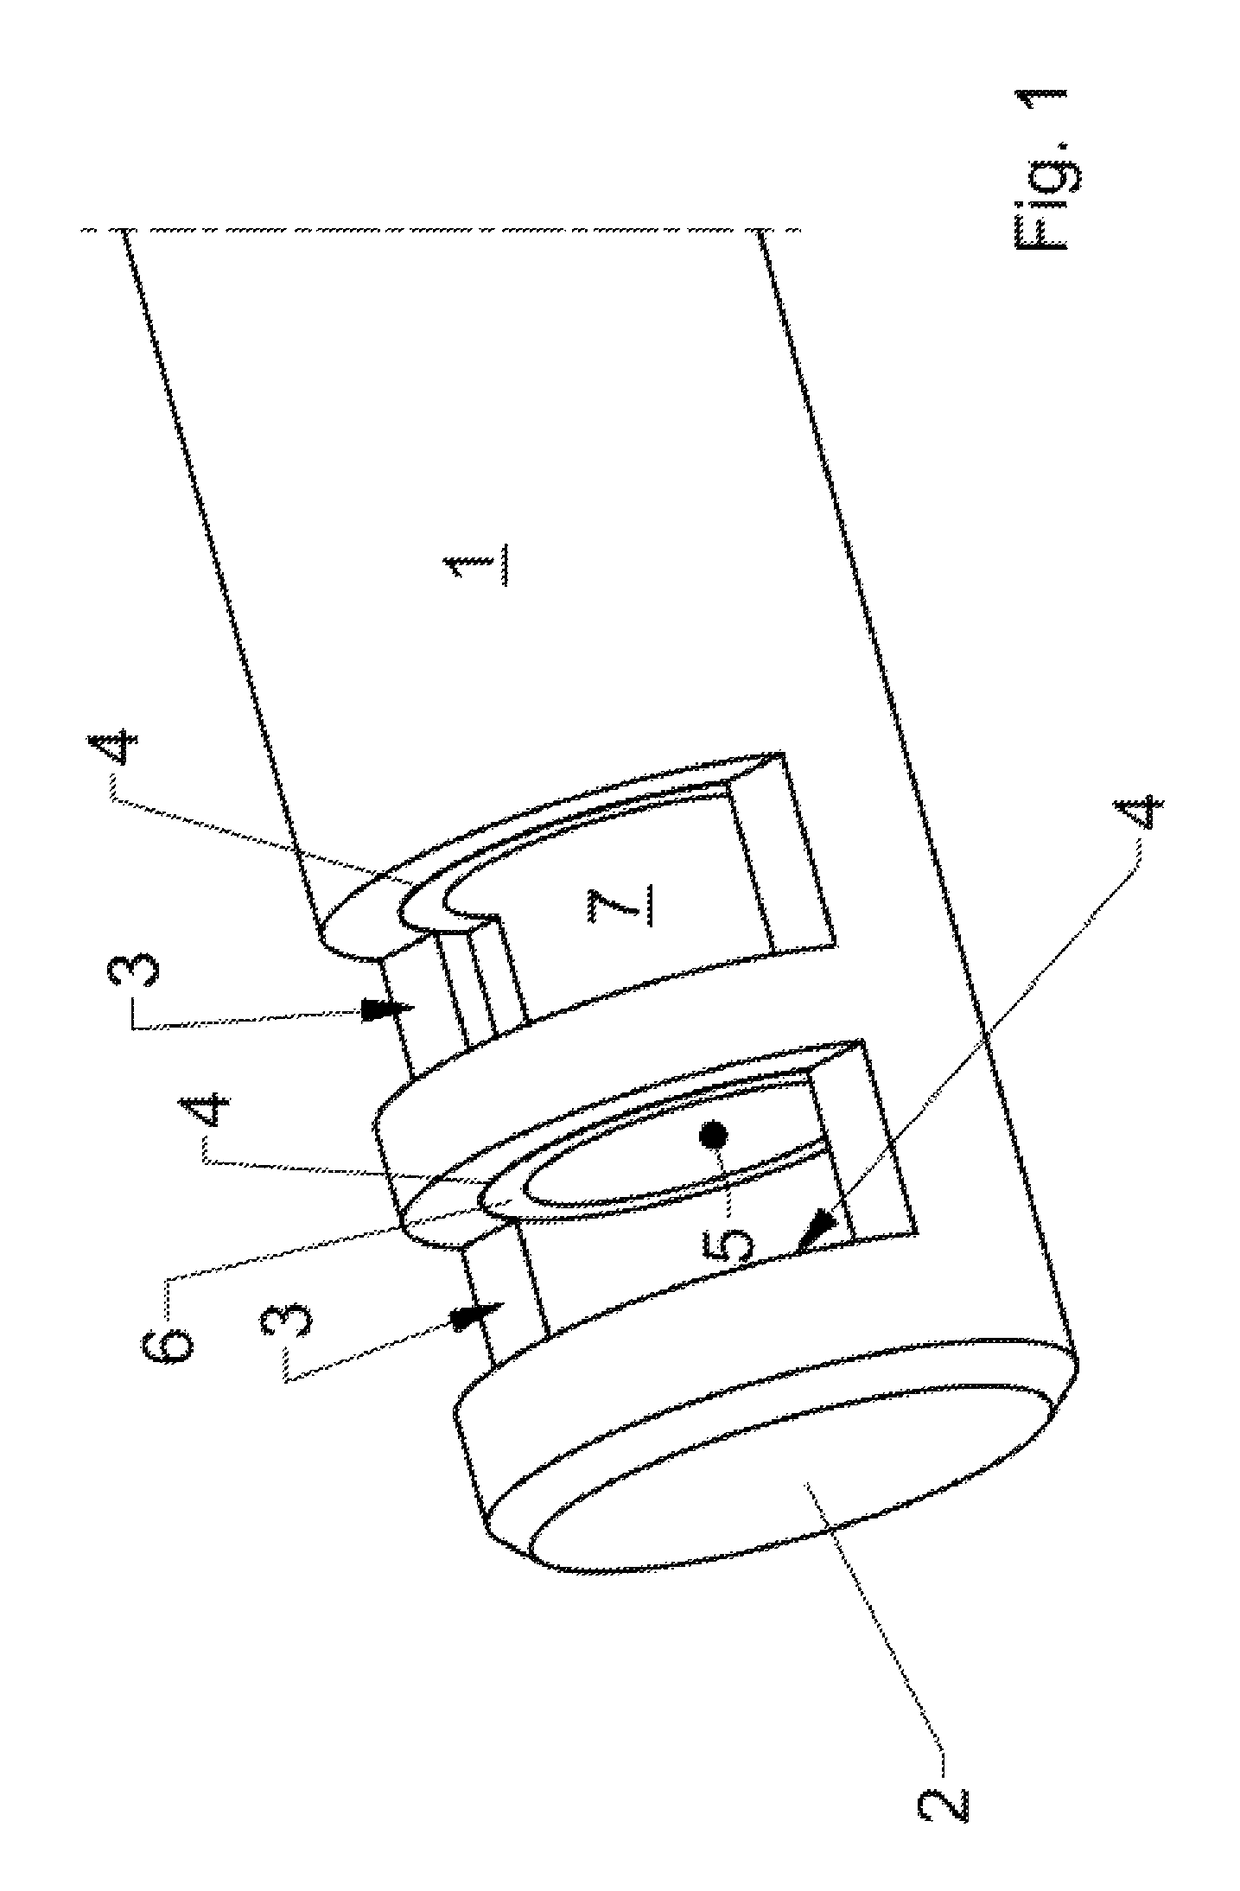 Apparatus for cutting and aspirating tissue